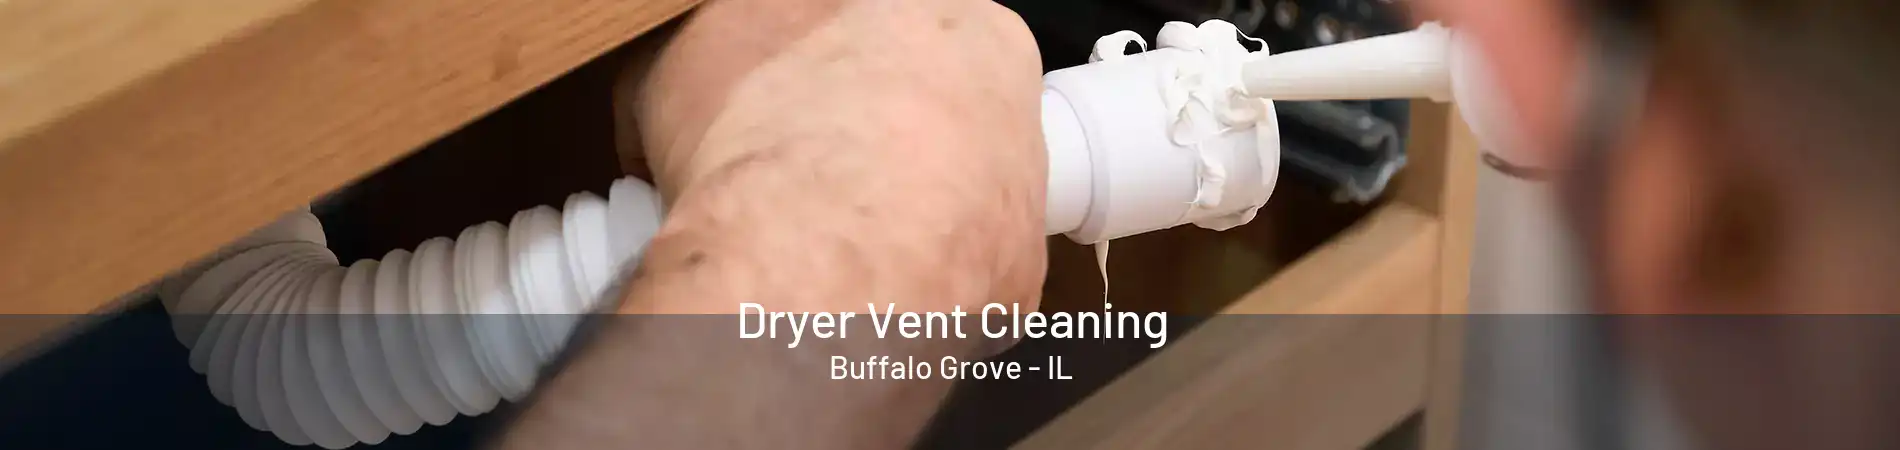 Dryer Vent Cleaning Buffalo Grove - IL